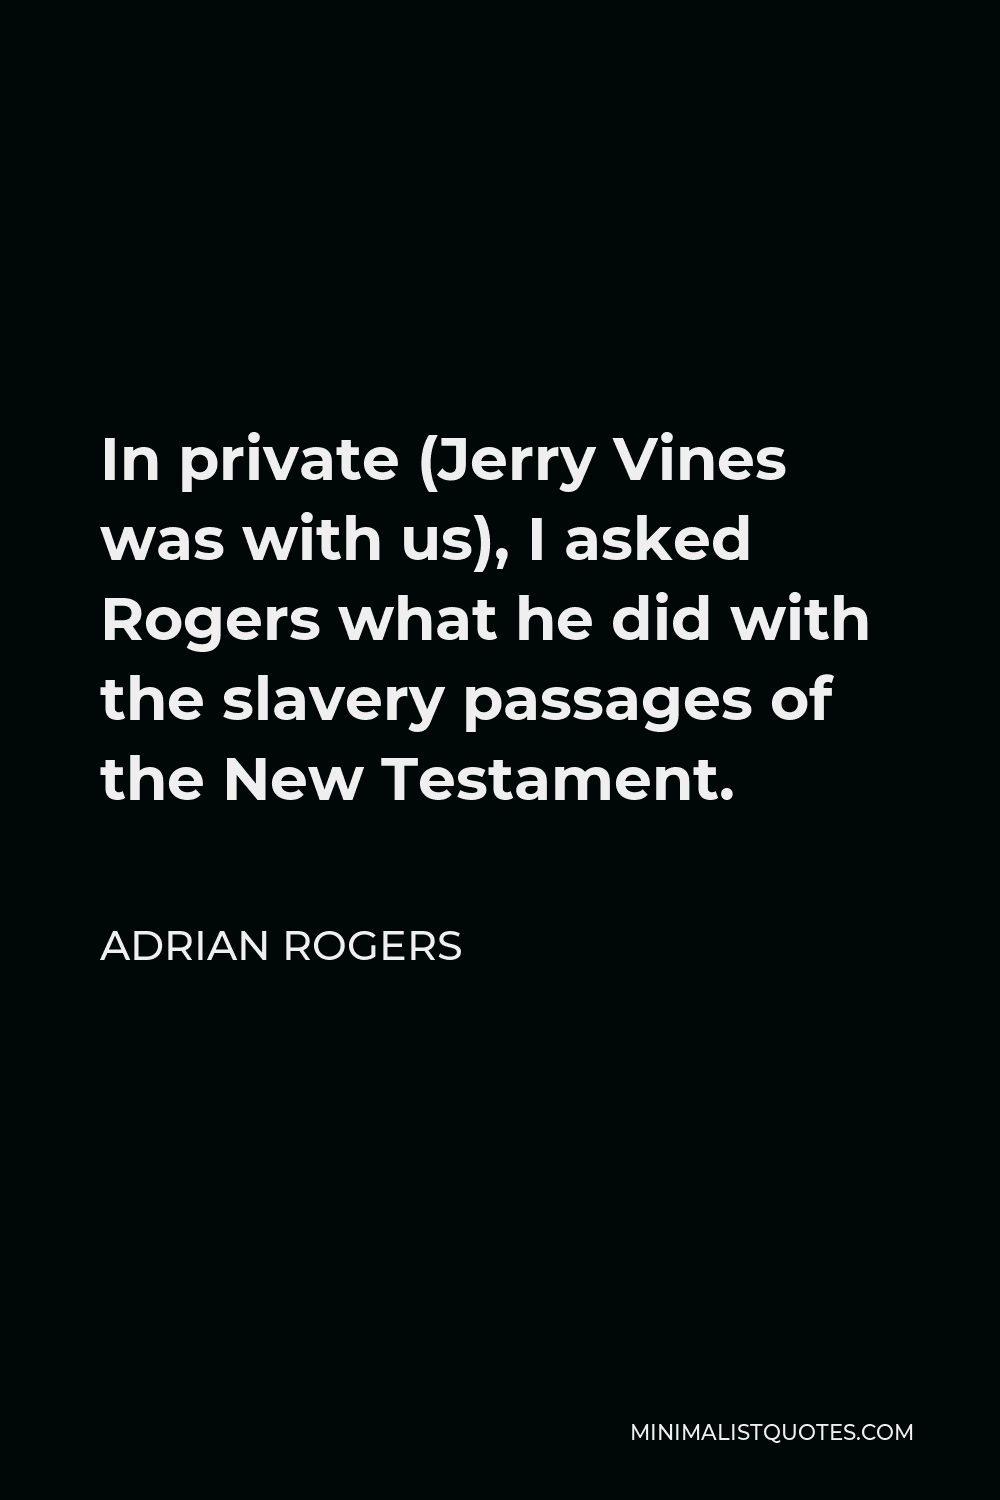 Adrian Rogers Quote - In private (Jerry Vines was with us), I asked Rogers what he did with the slavery passages of the New Testament.